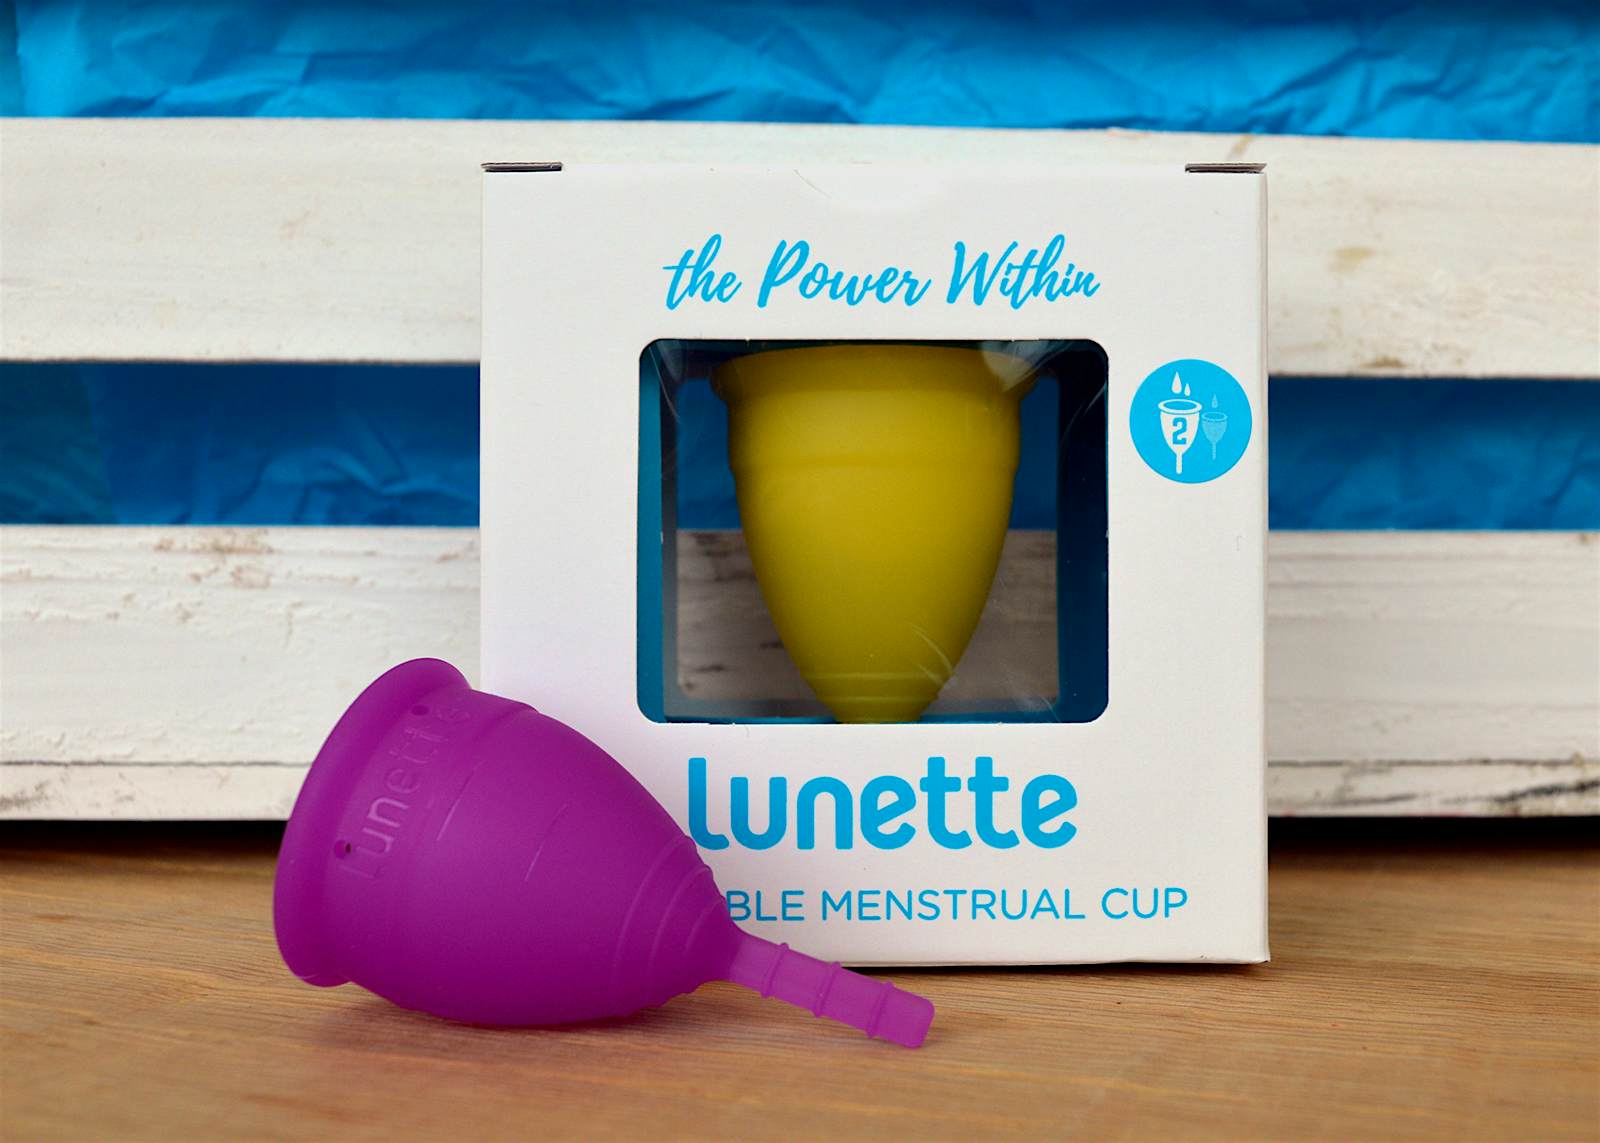 Lunette, a reusable menstrual cup © Emma Sparks / Lonely Planet